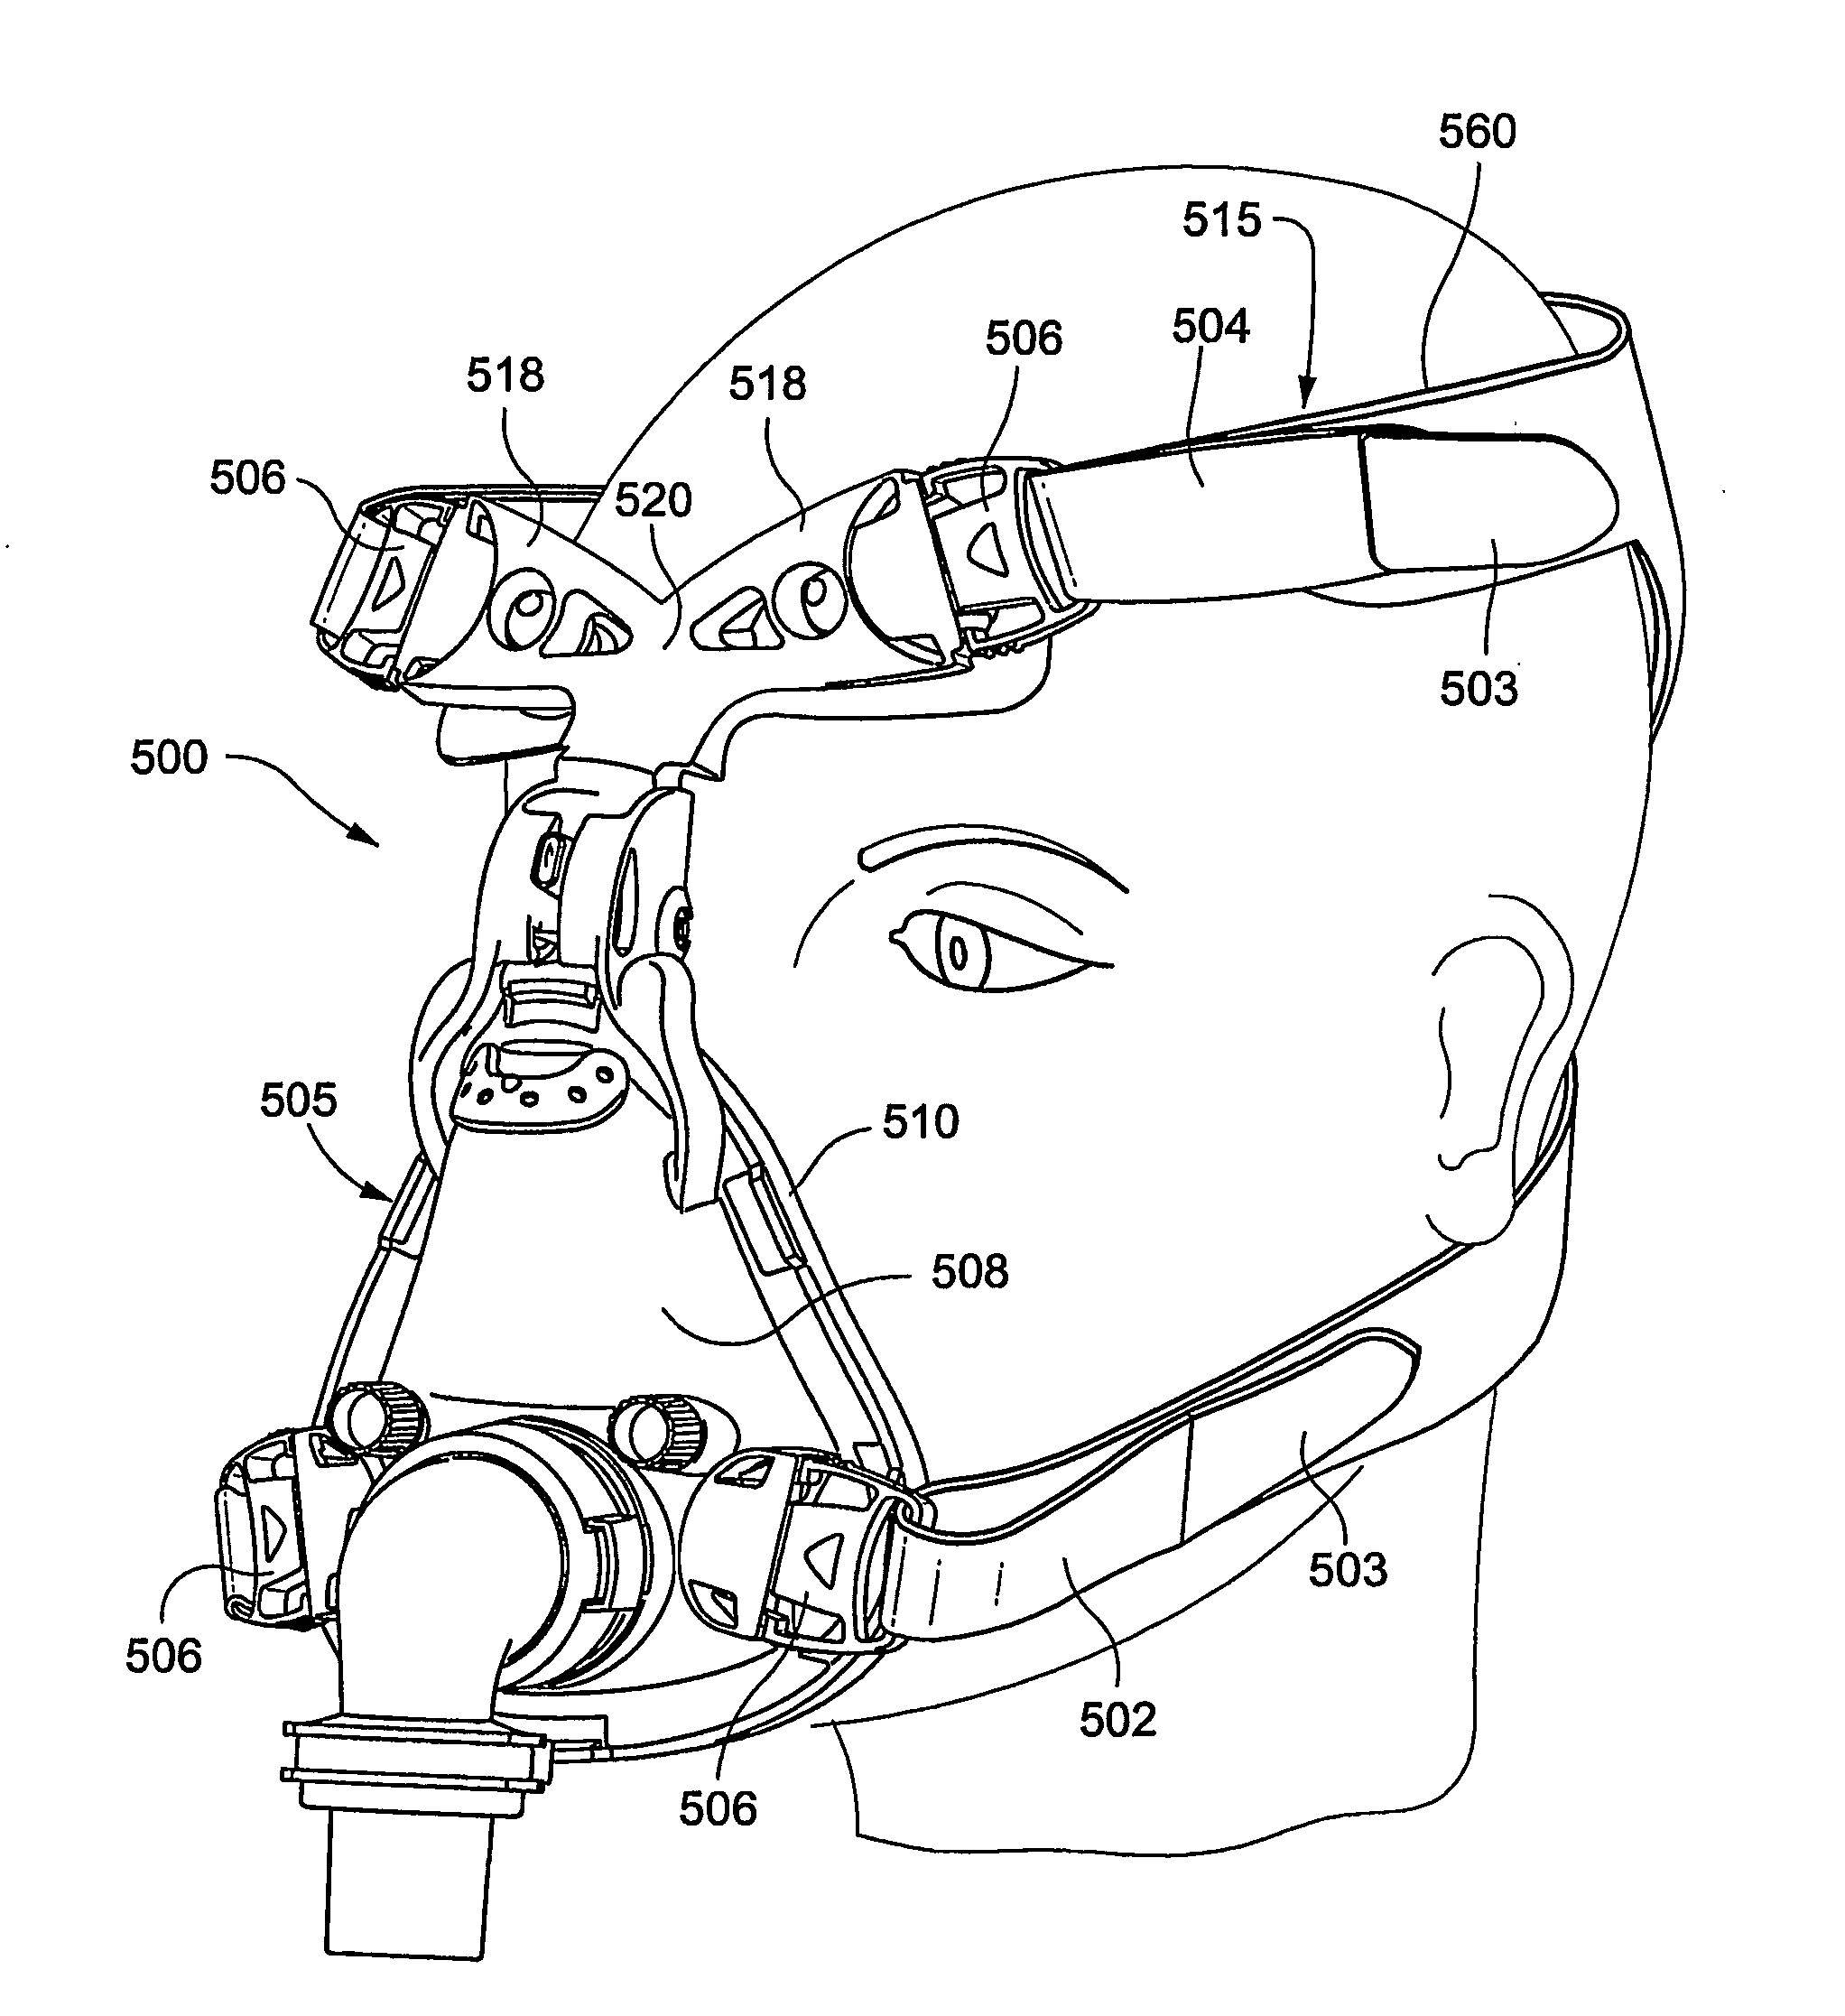 Forehead support for a patient interface